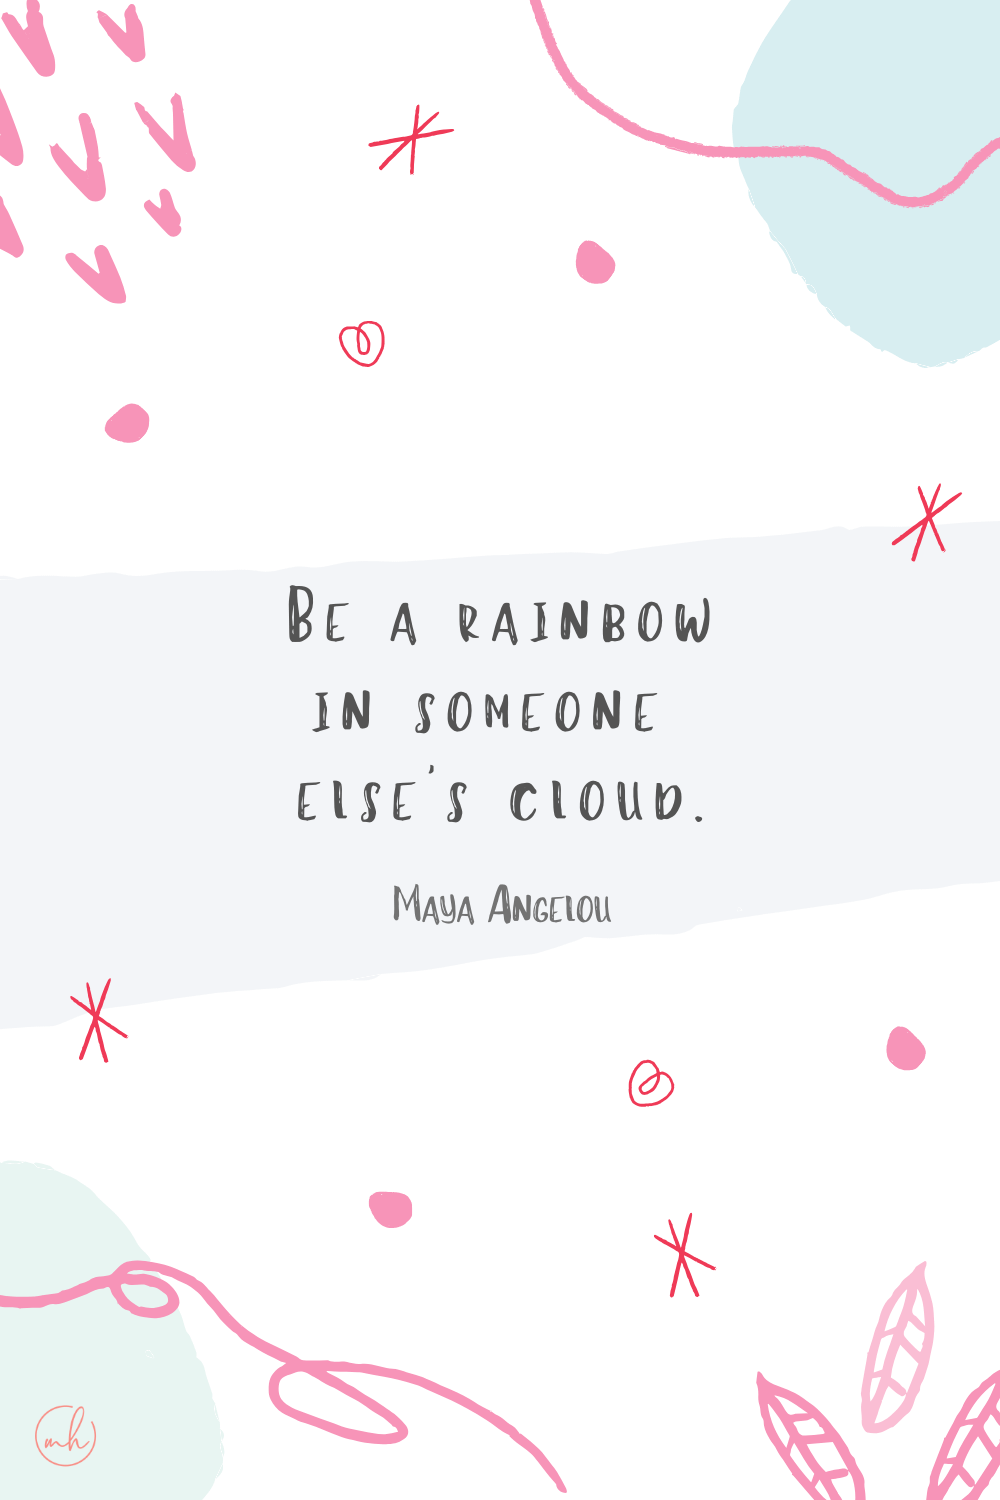 "Be a rainbow in someone else's cloud." – Maya Angelou